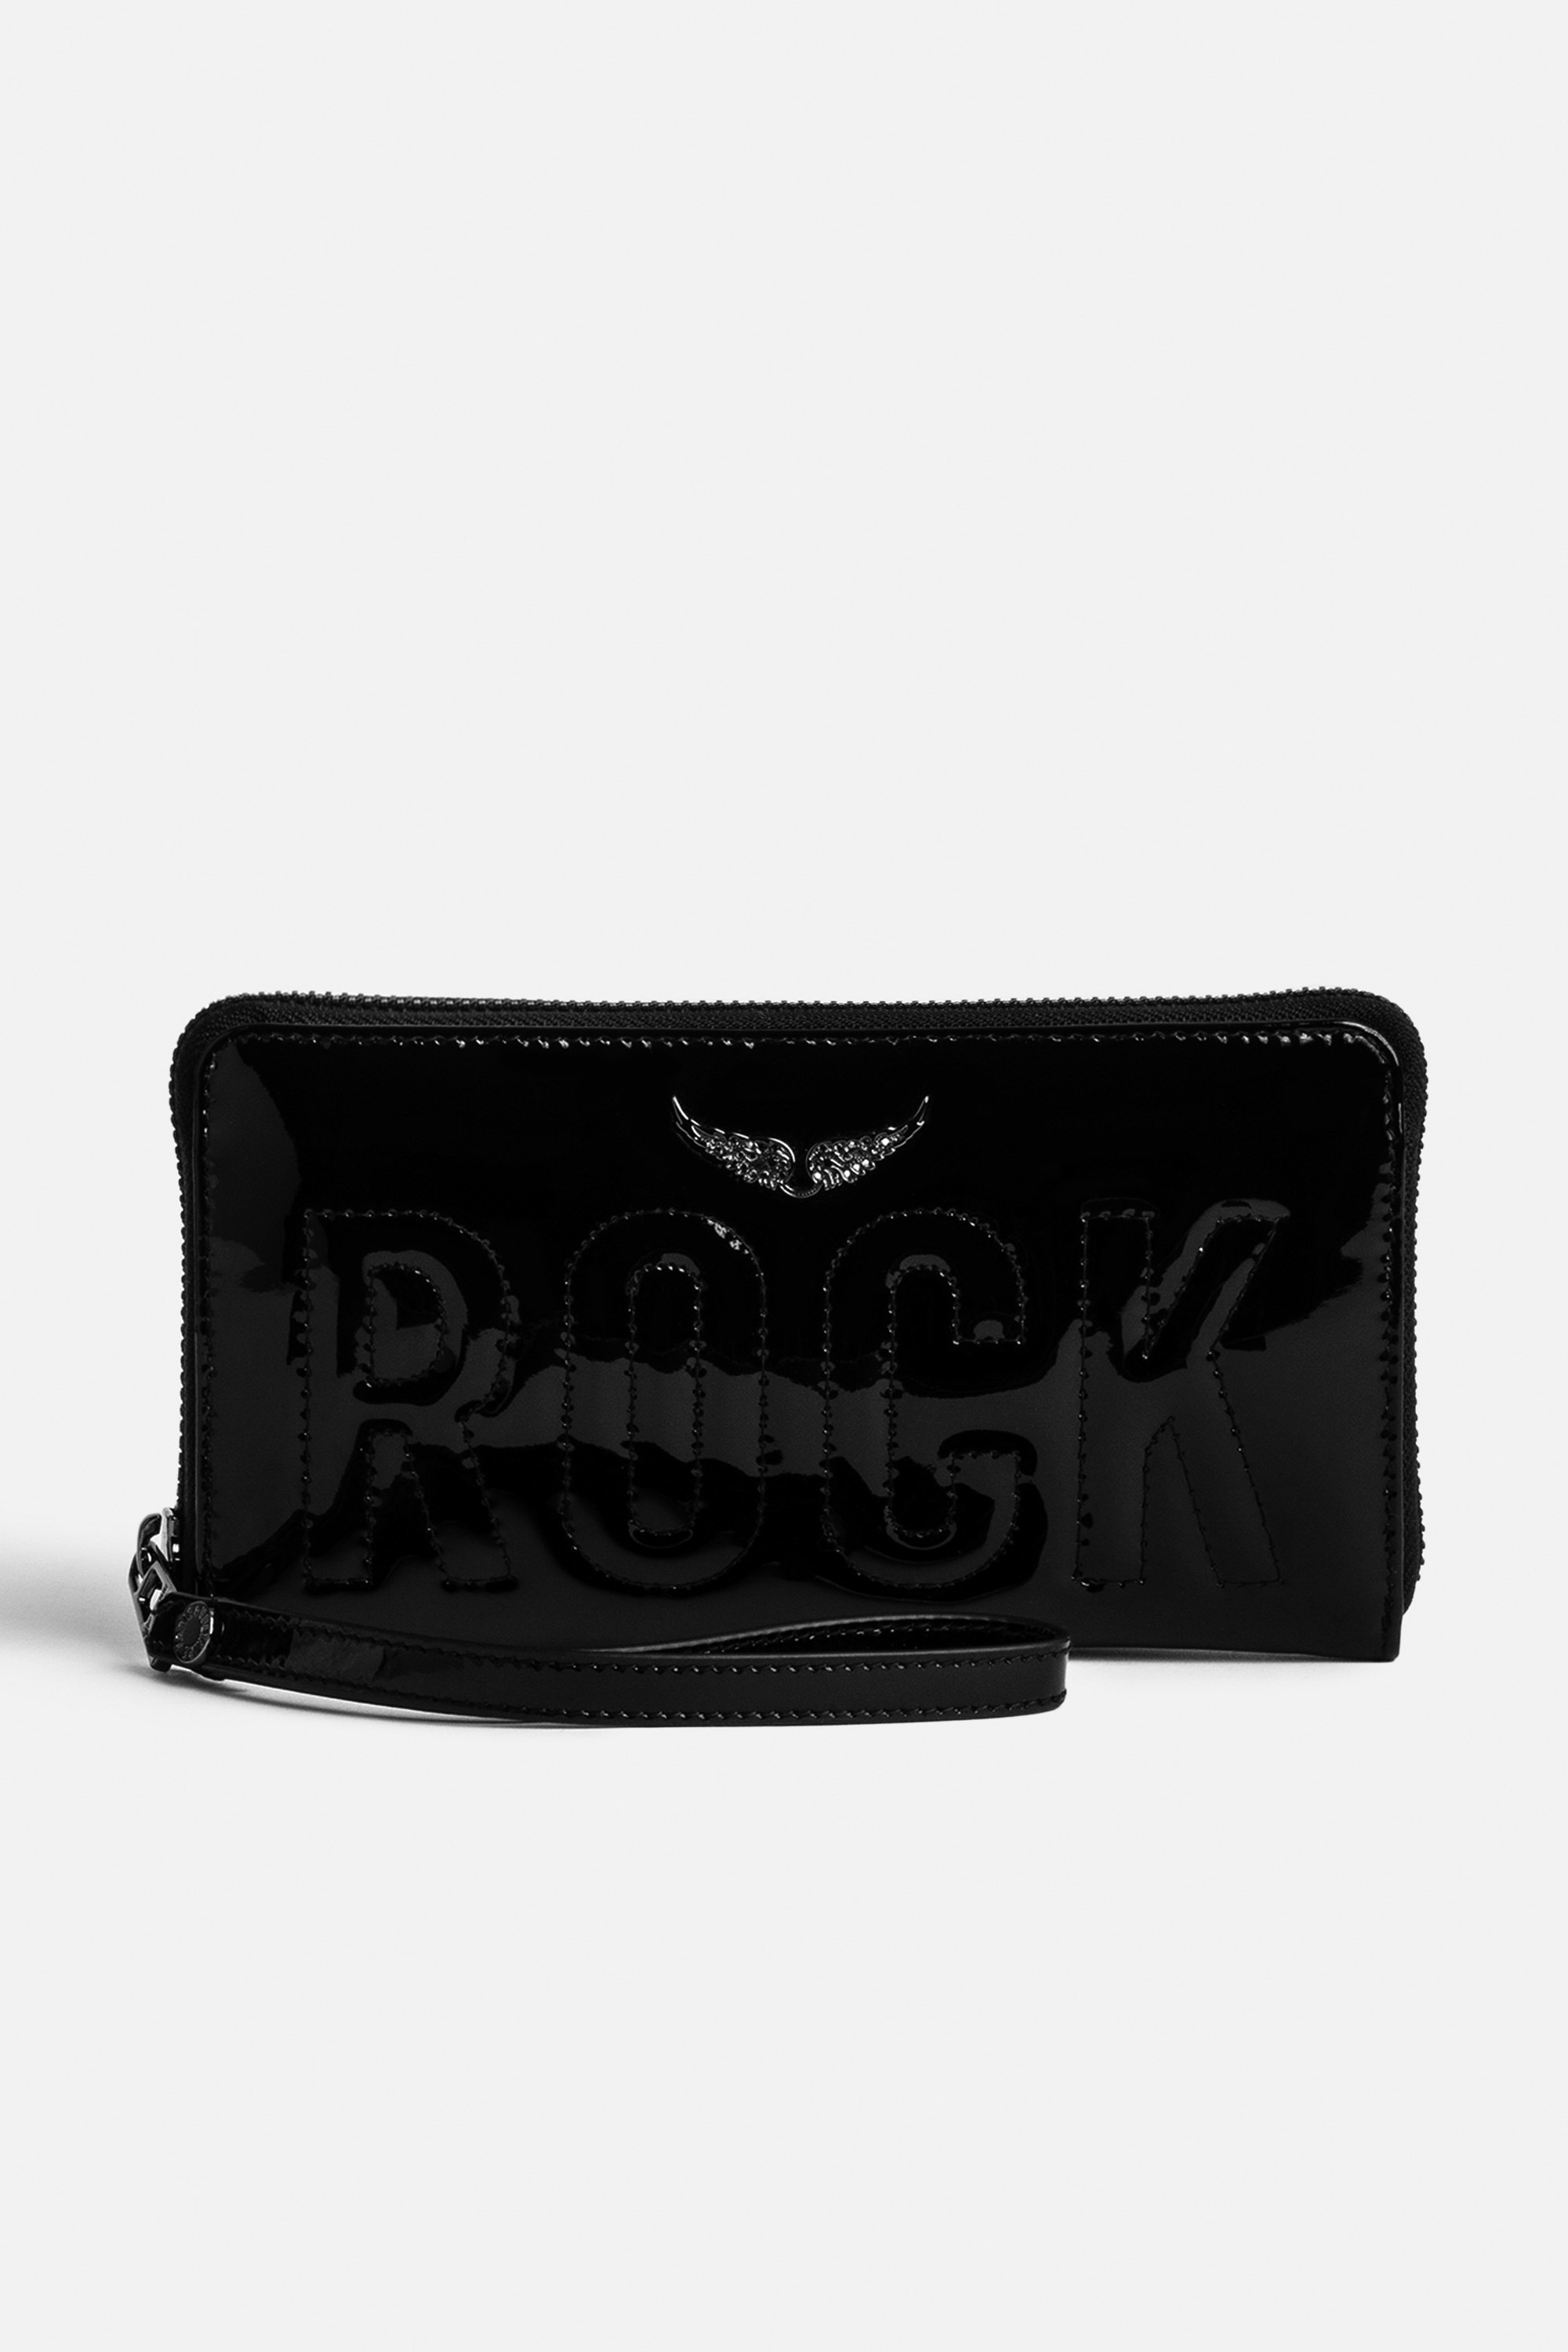 Compagnon Wallet Women’s black patent leather Compagnon wallet with topstitched “Rock” slogan and crystal-embellished wings charm